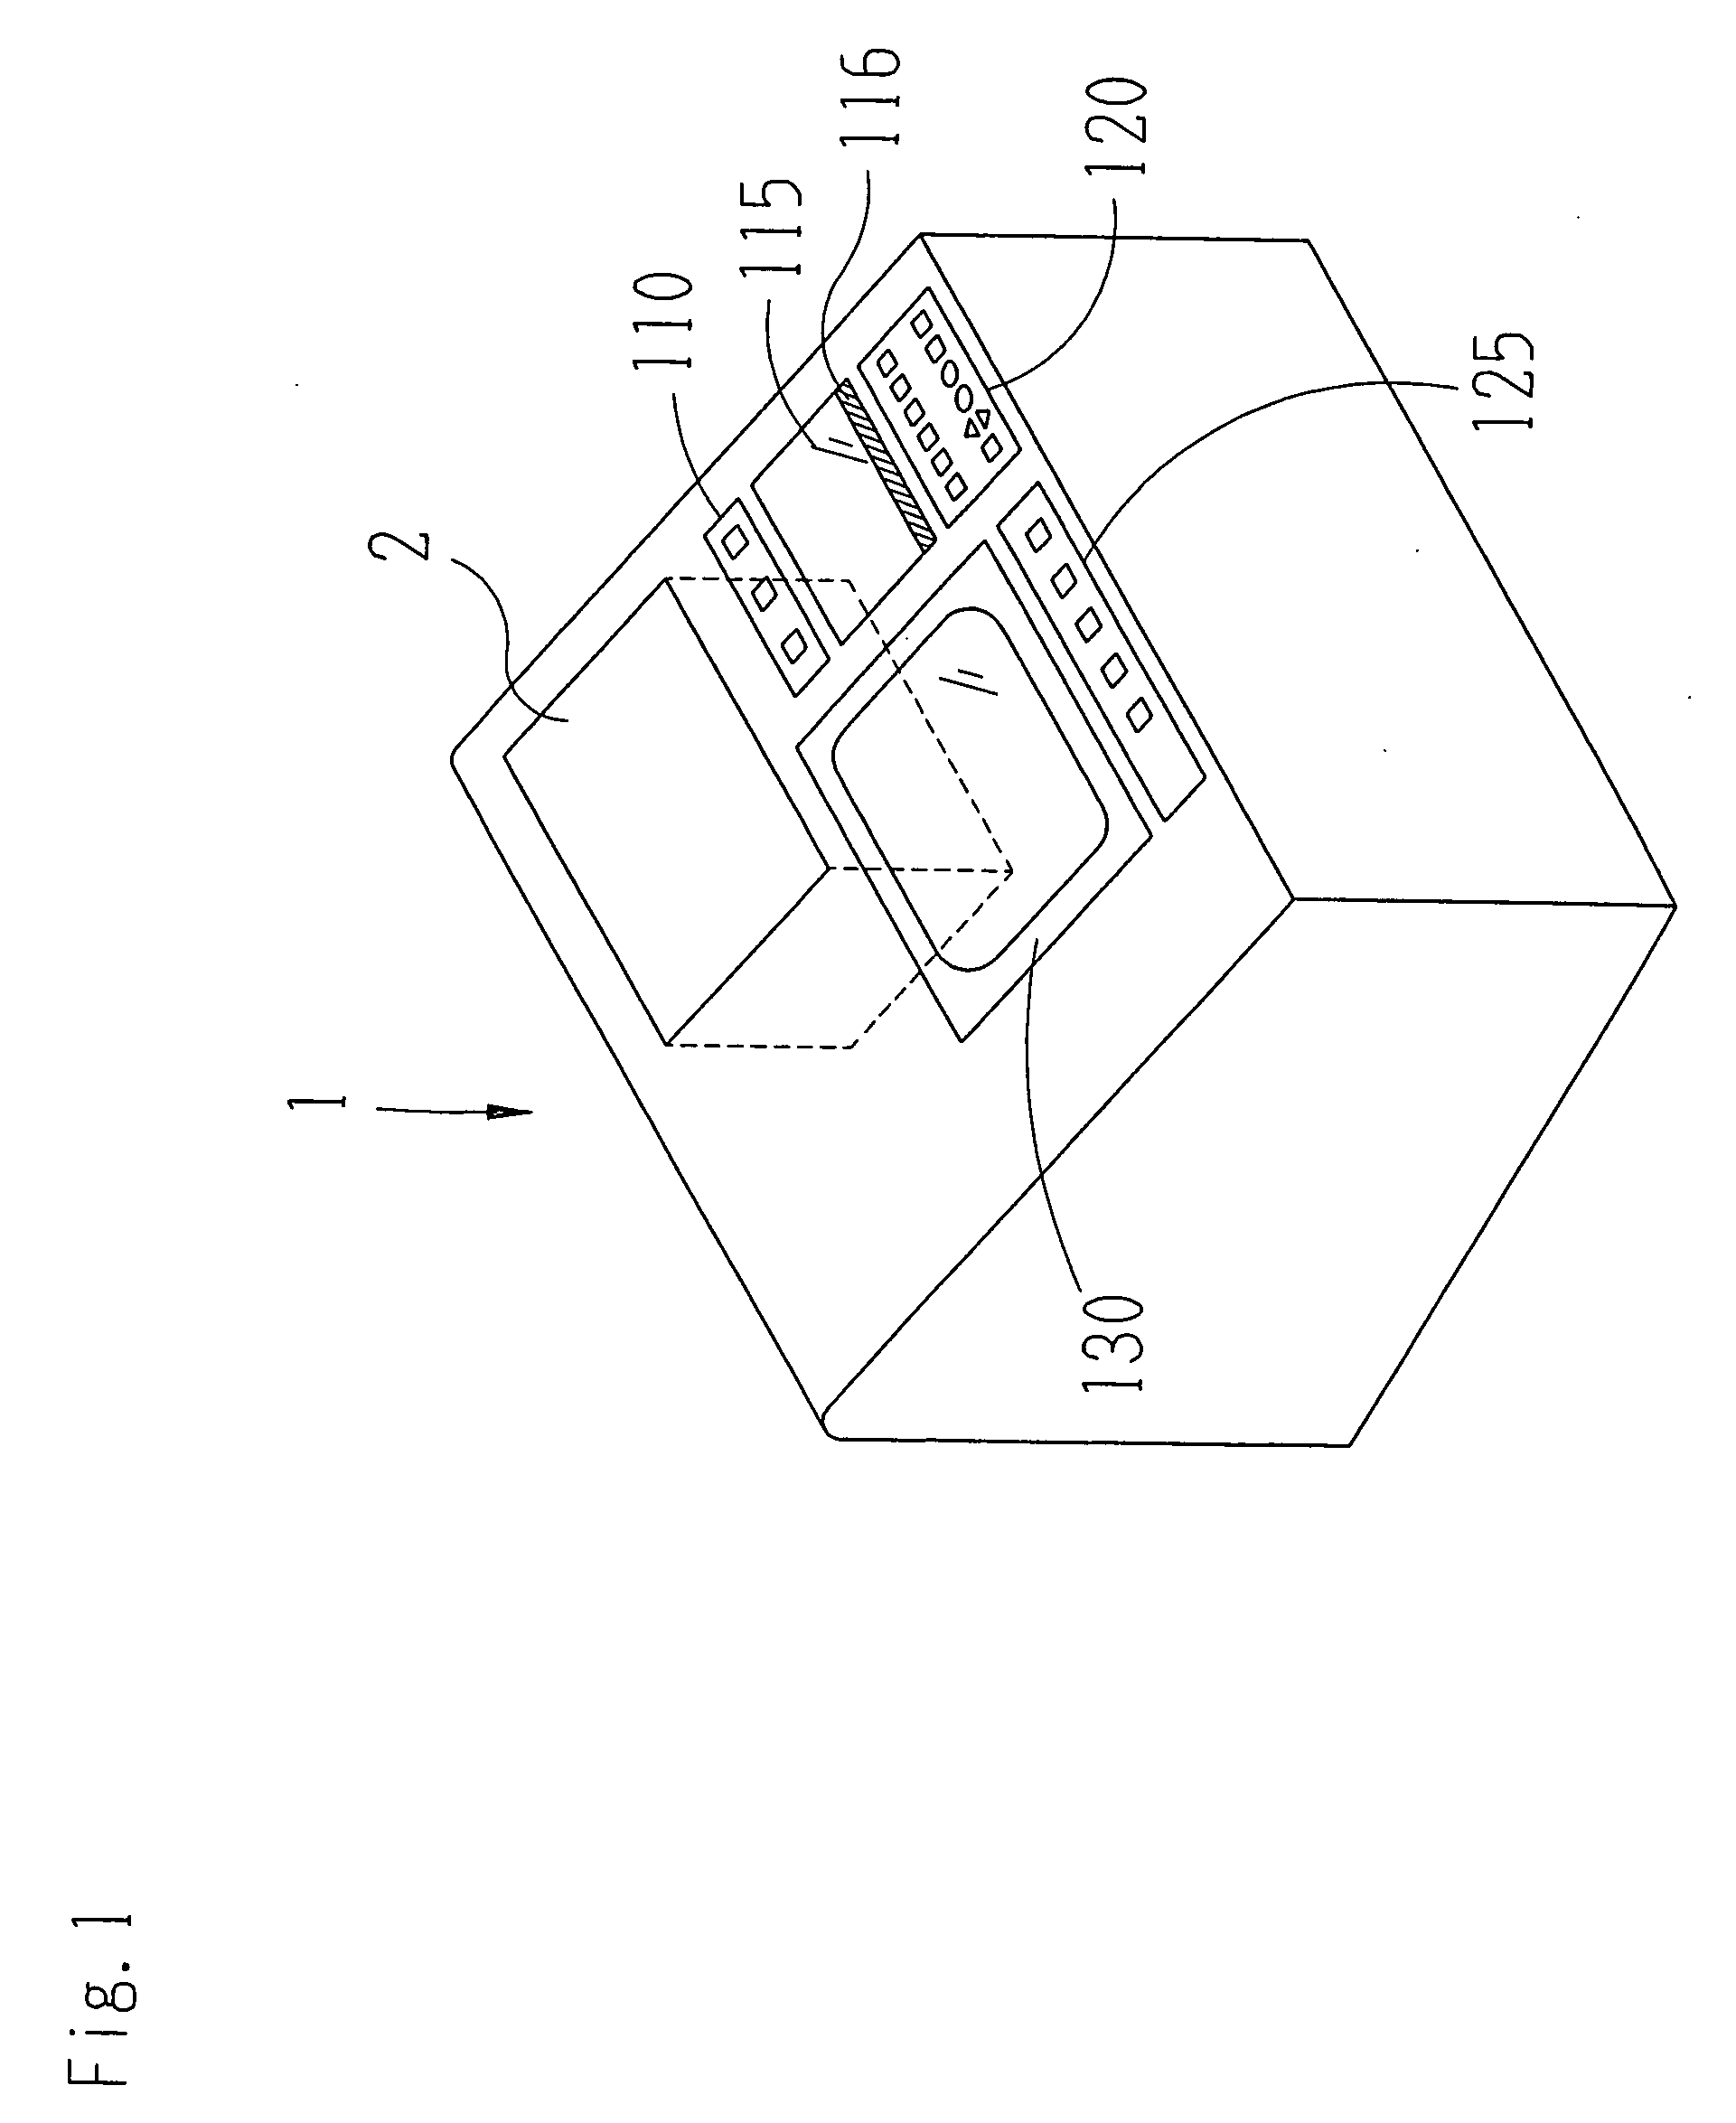 Layout setting device for processing eyeglass lens, eyeglass lens processing apparatus, eyeglass frame measuring device and cup attaching device, each having the same